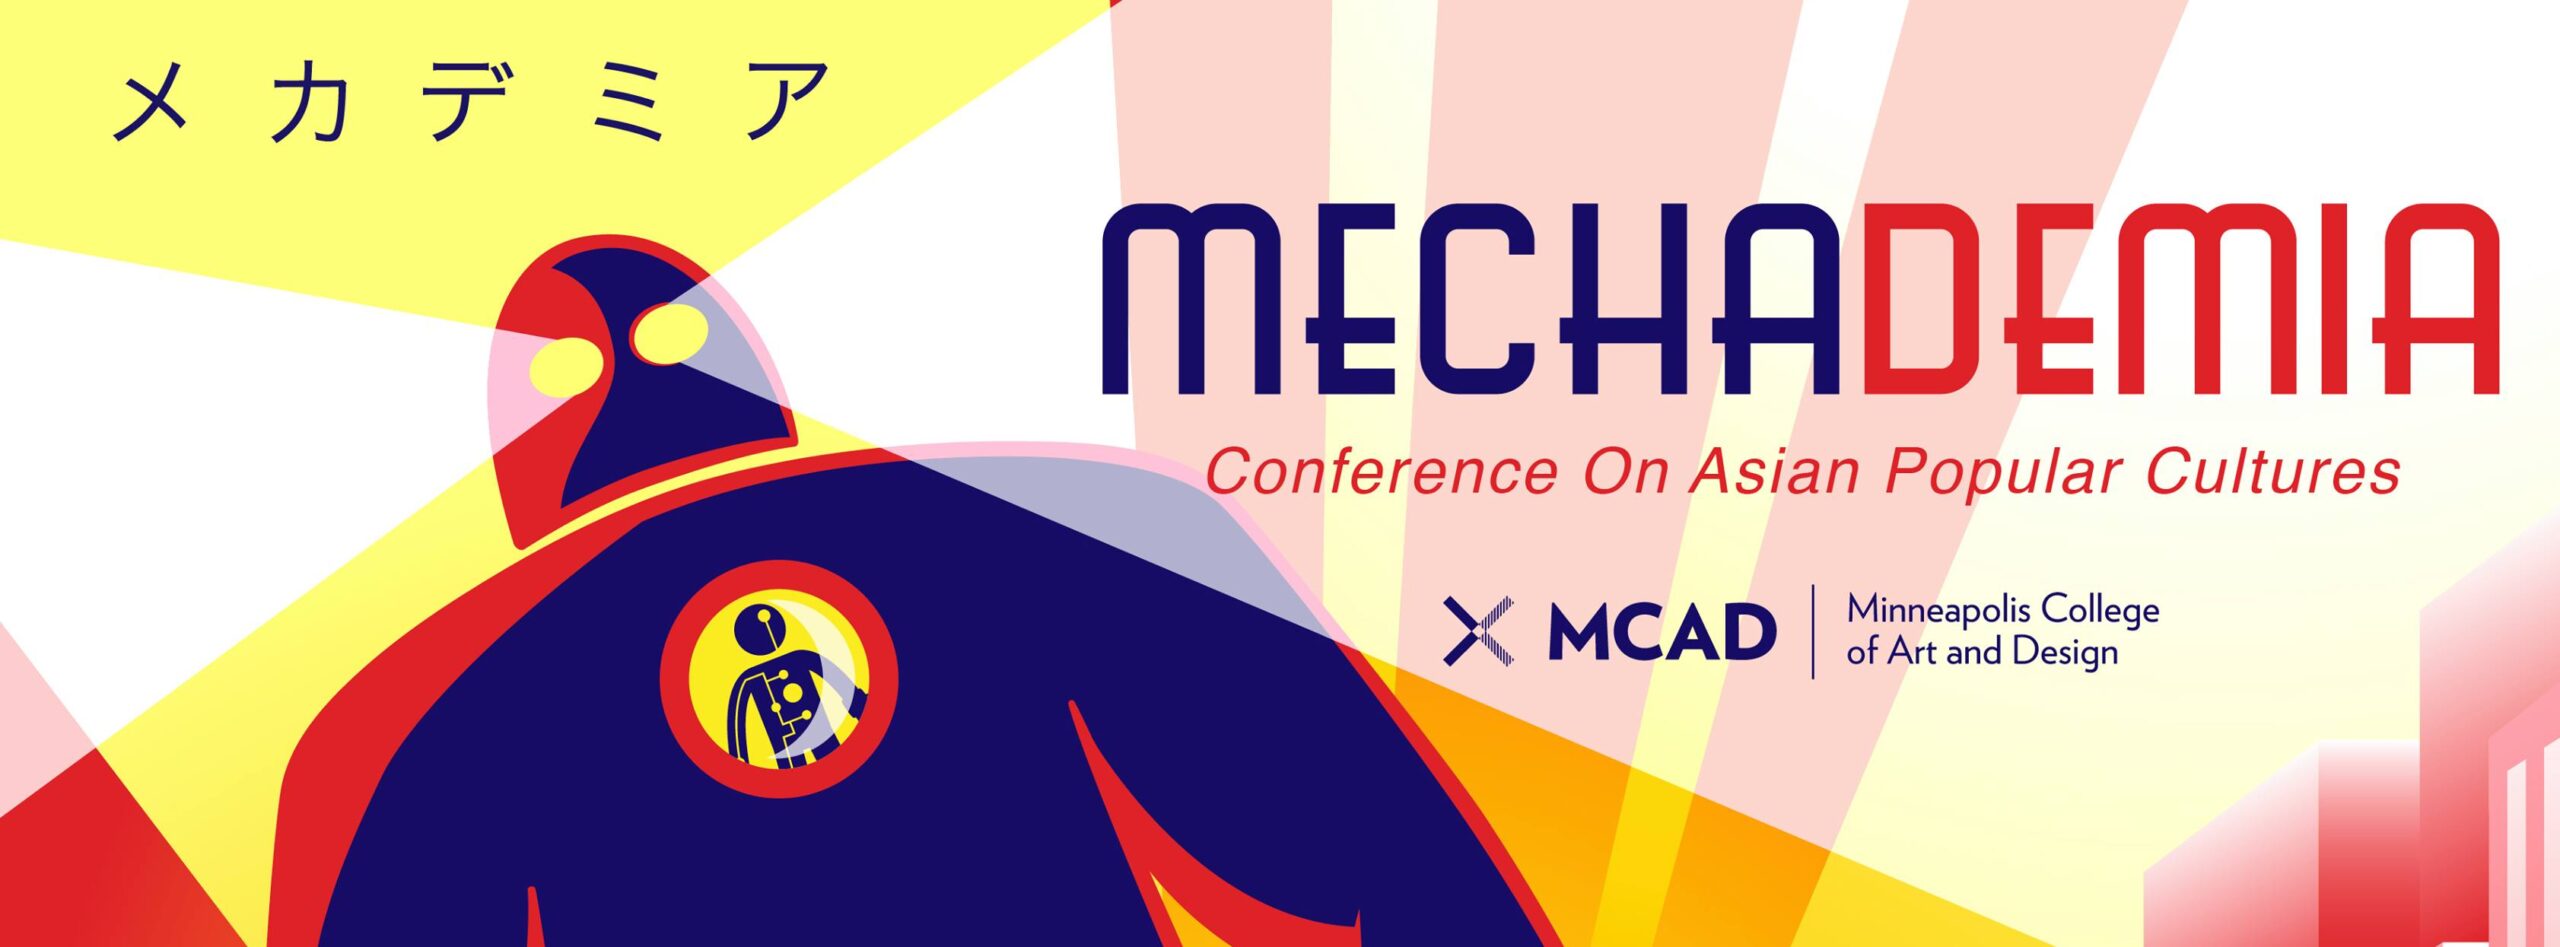 Lessons Learned from Mechademia 2016